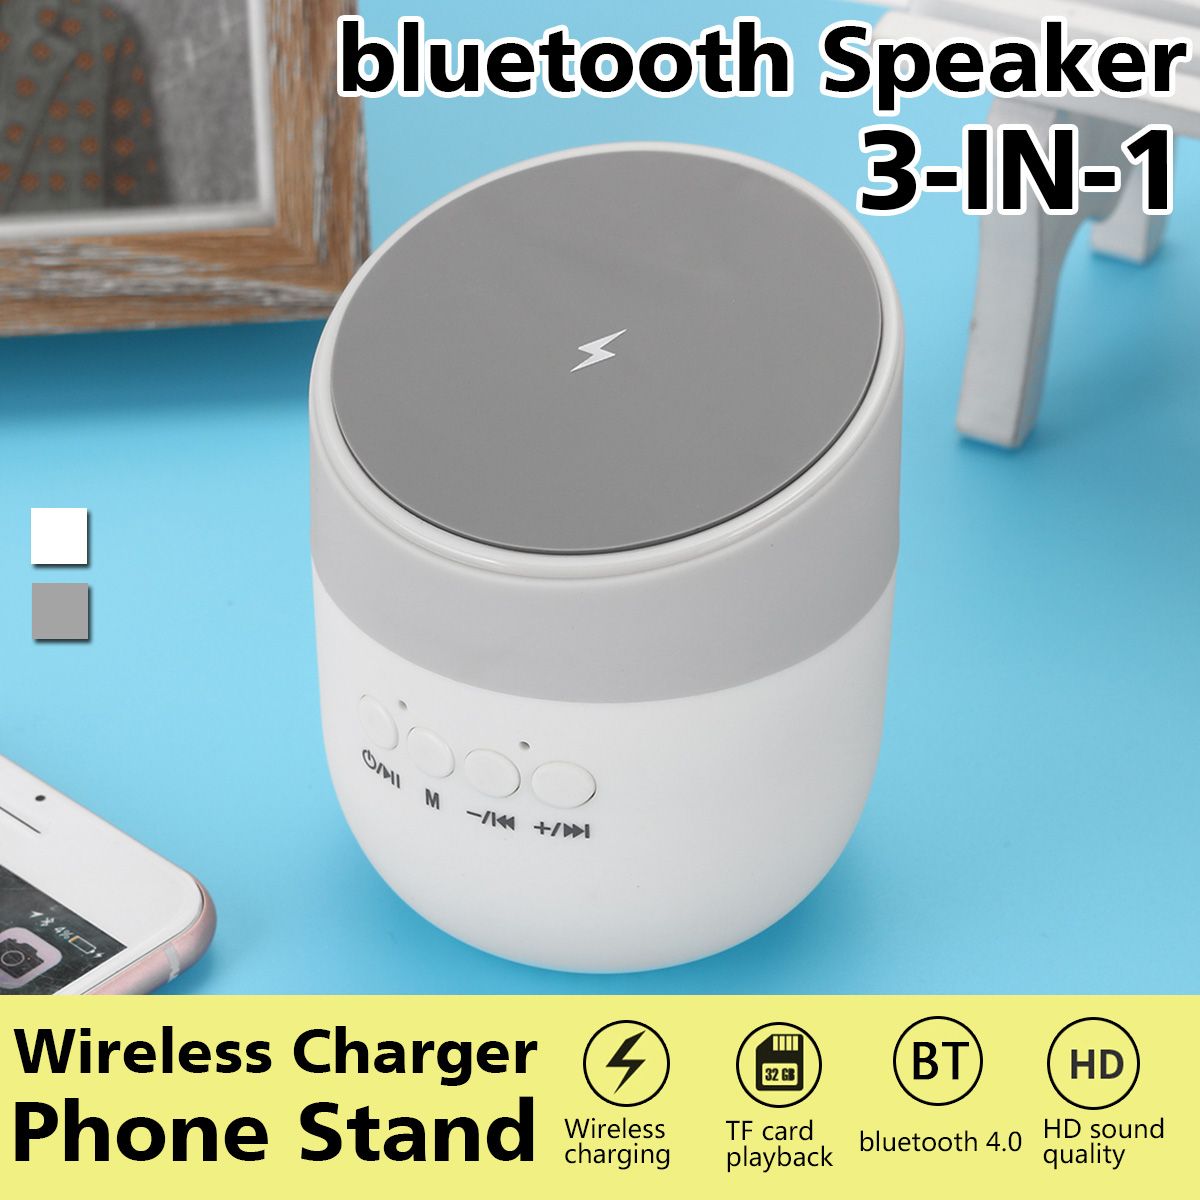 3-in-1-Qi-Wireless-Charging-Phone-Stand-TF-Card-Playback-HIFI-Stereo-bluetooth-Speaker-1652792